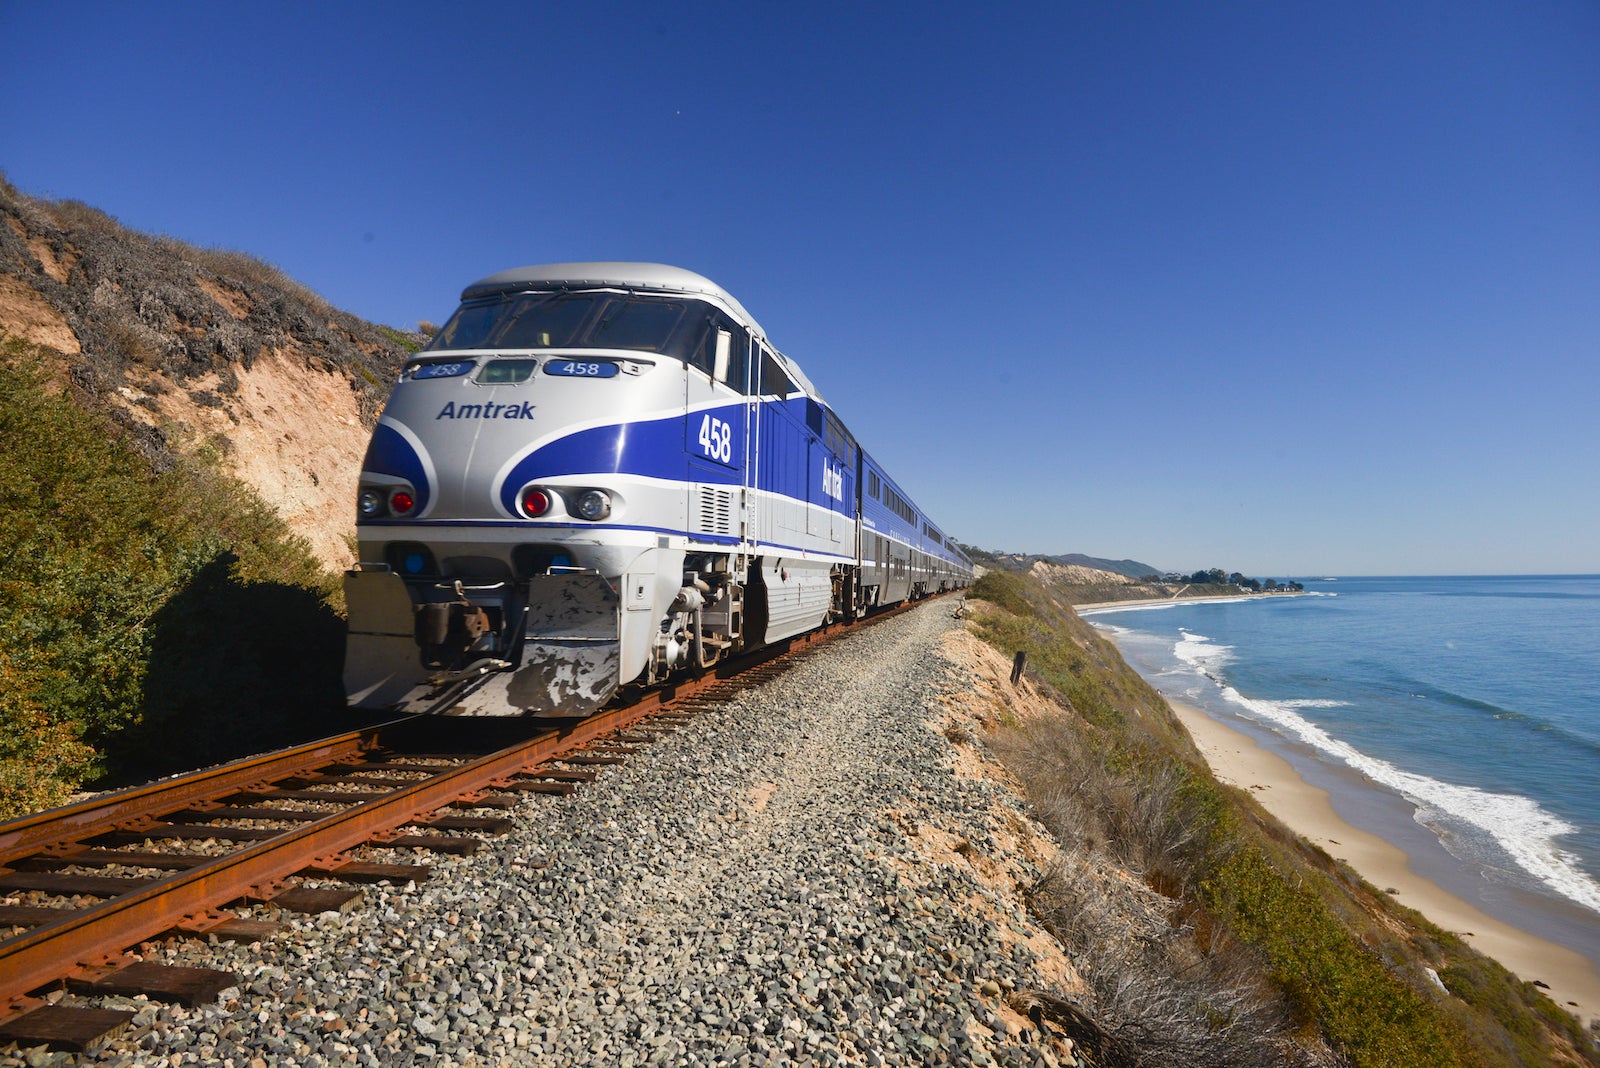 Amtrak Pacific Surfliner service likely disrupted until at least mid-December